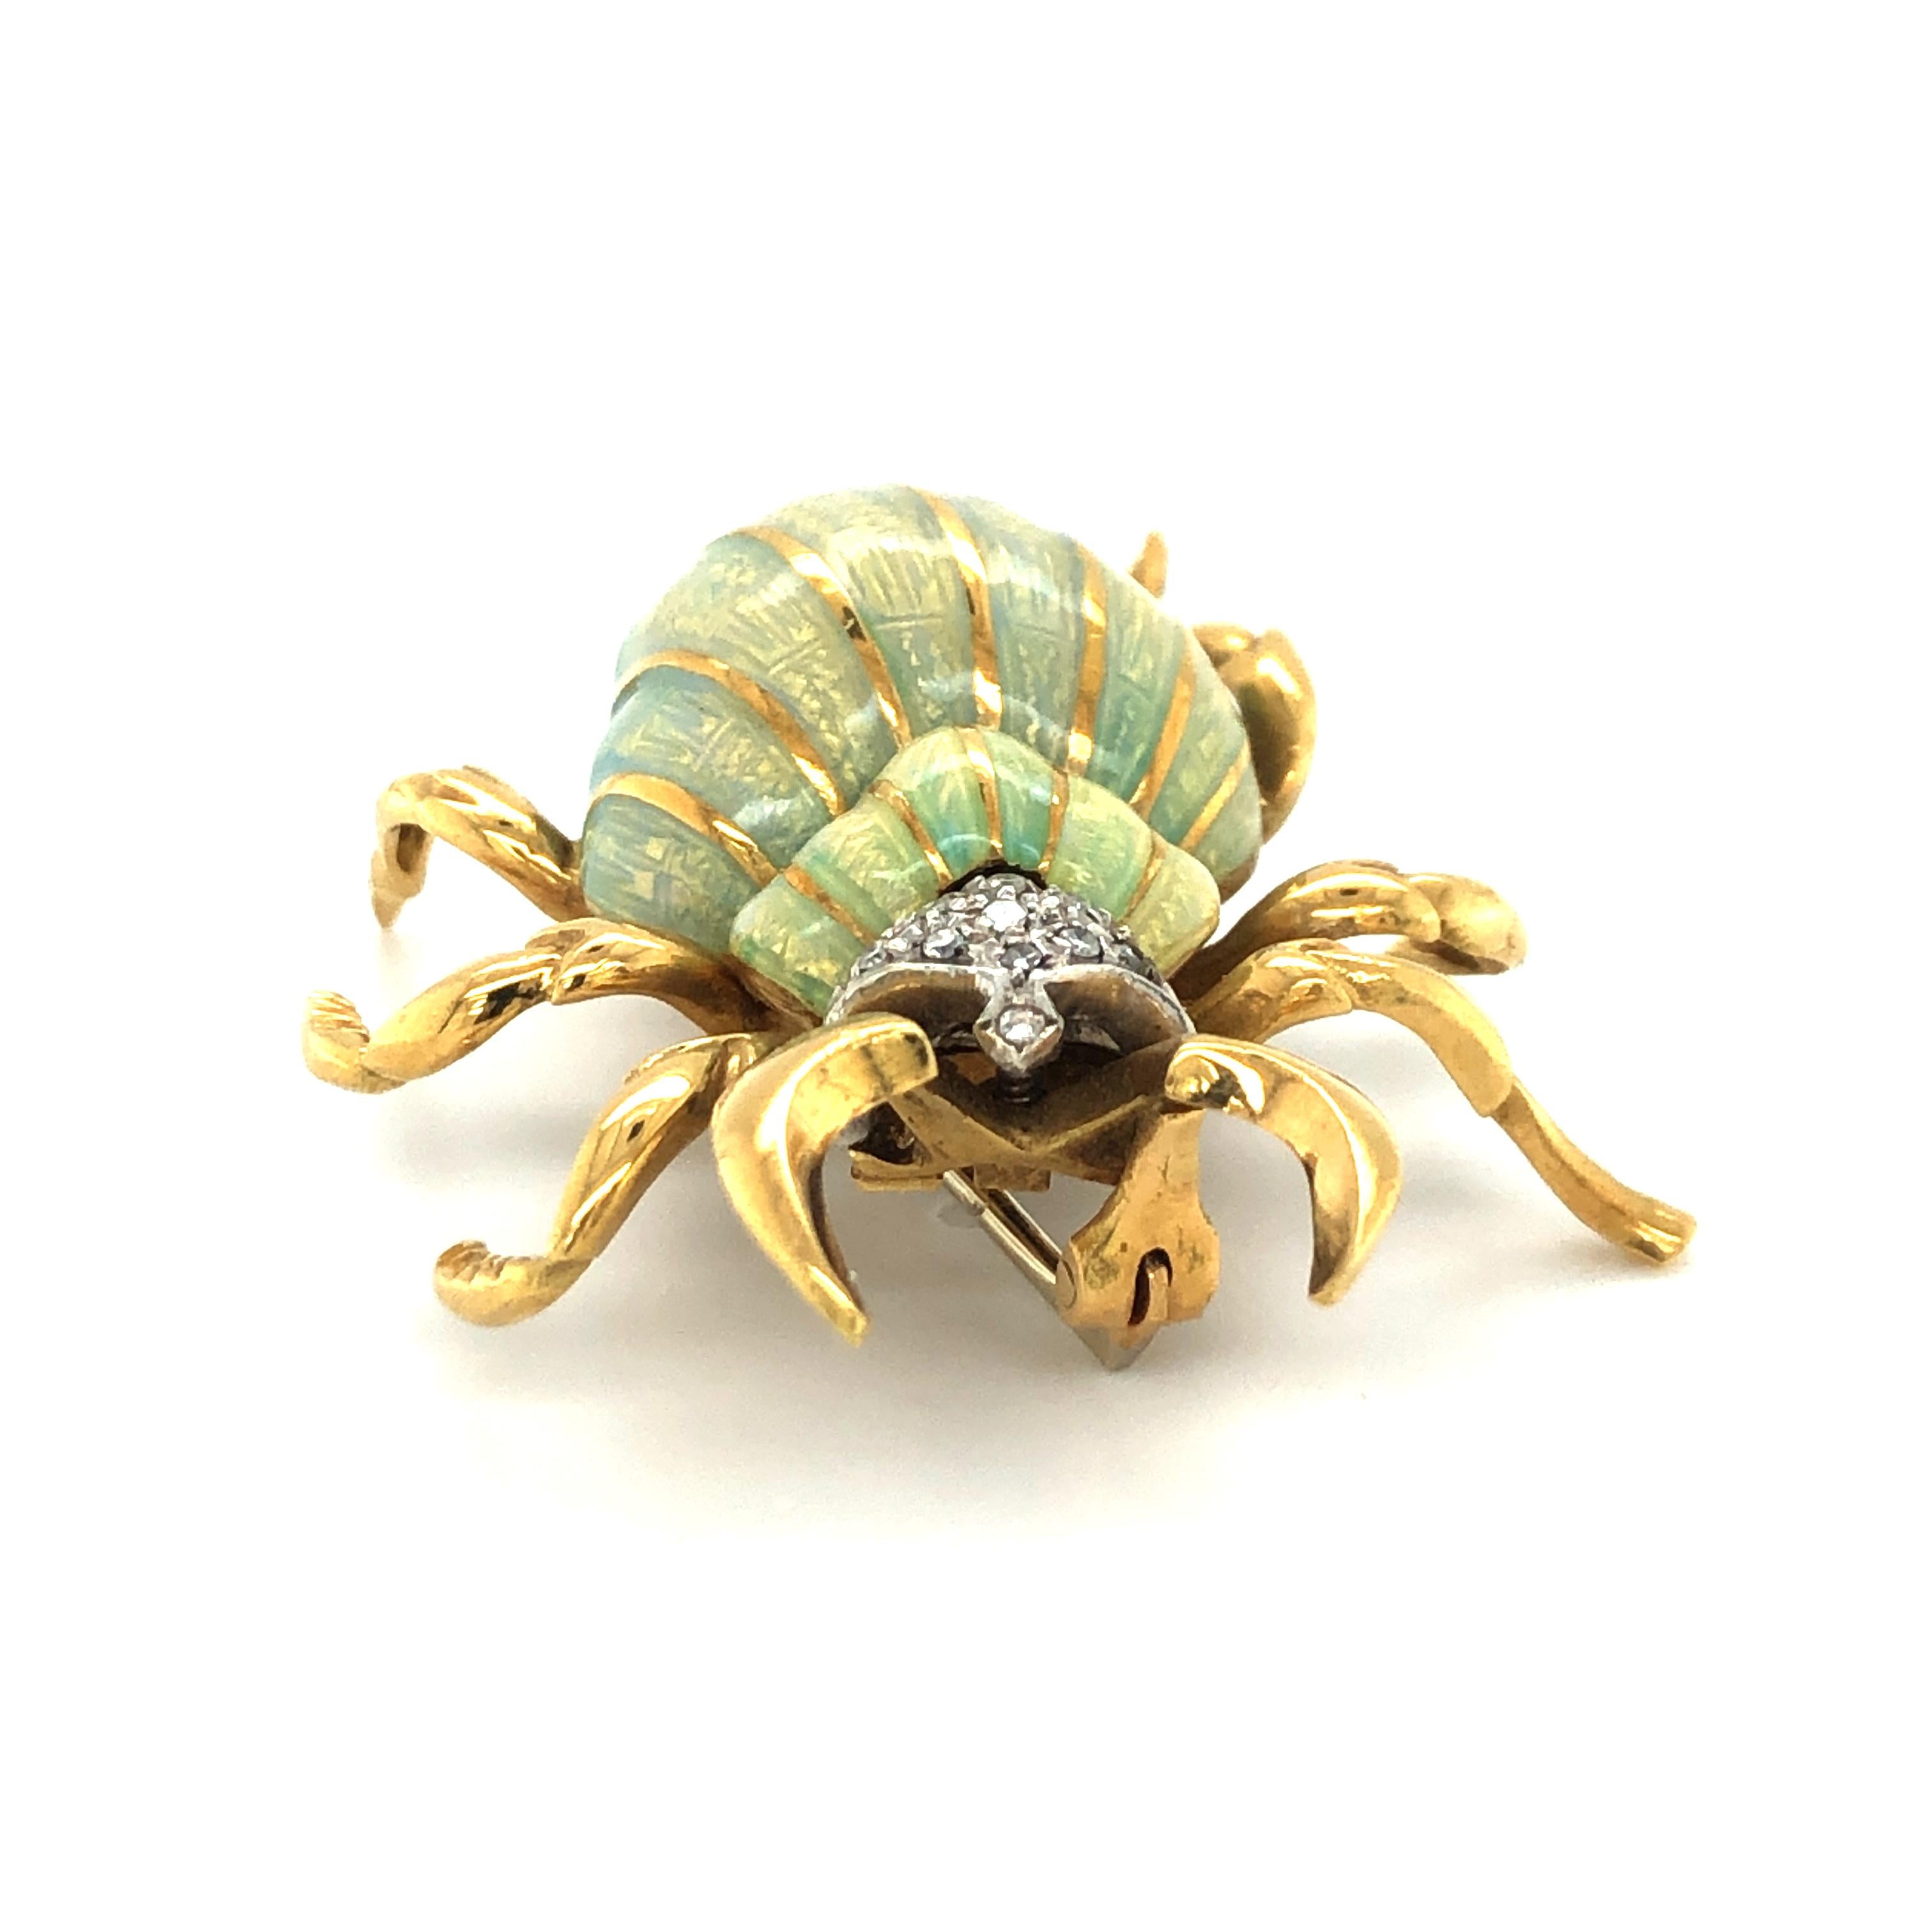 Single Cut Stunning Enamel and Diamond Beetle Brooch in 18 Karat Yellow and White Gold